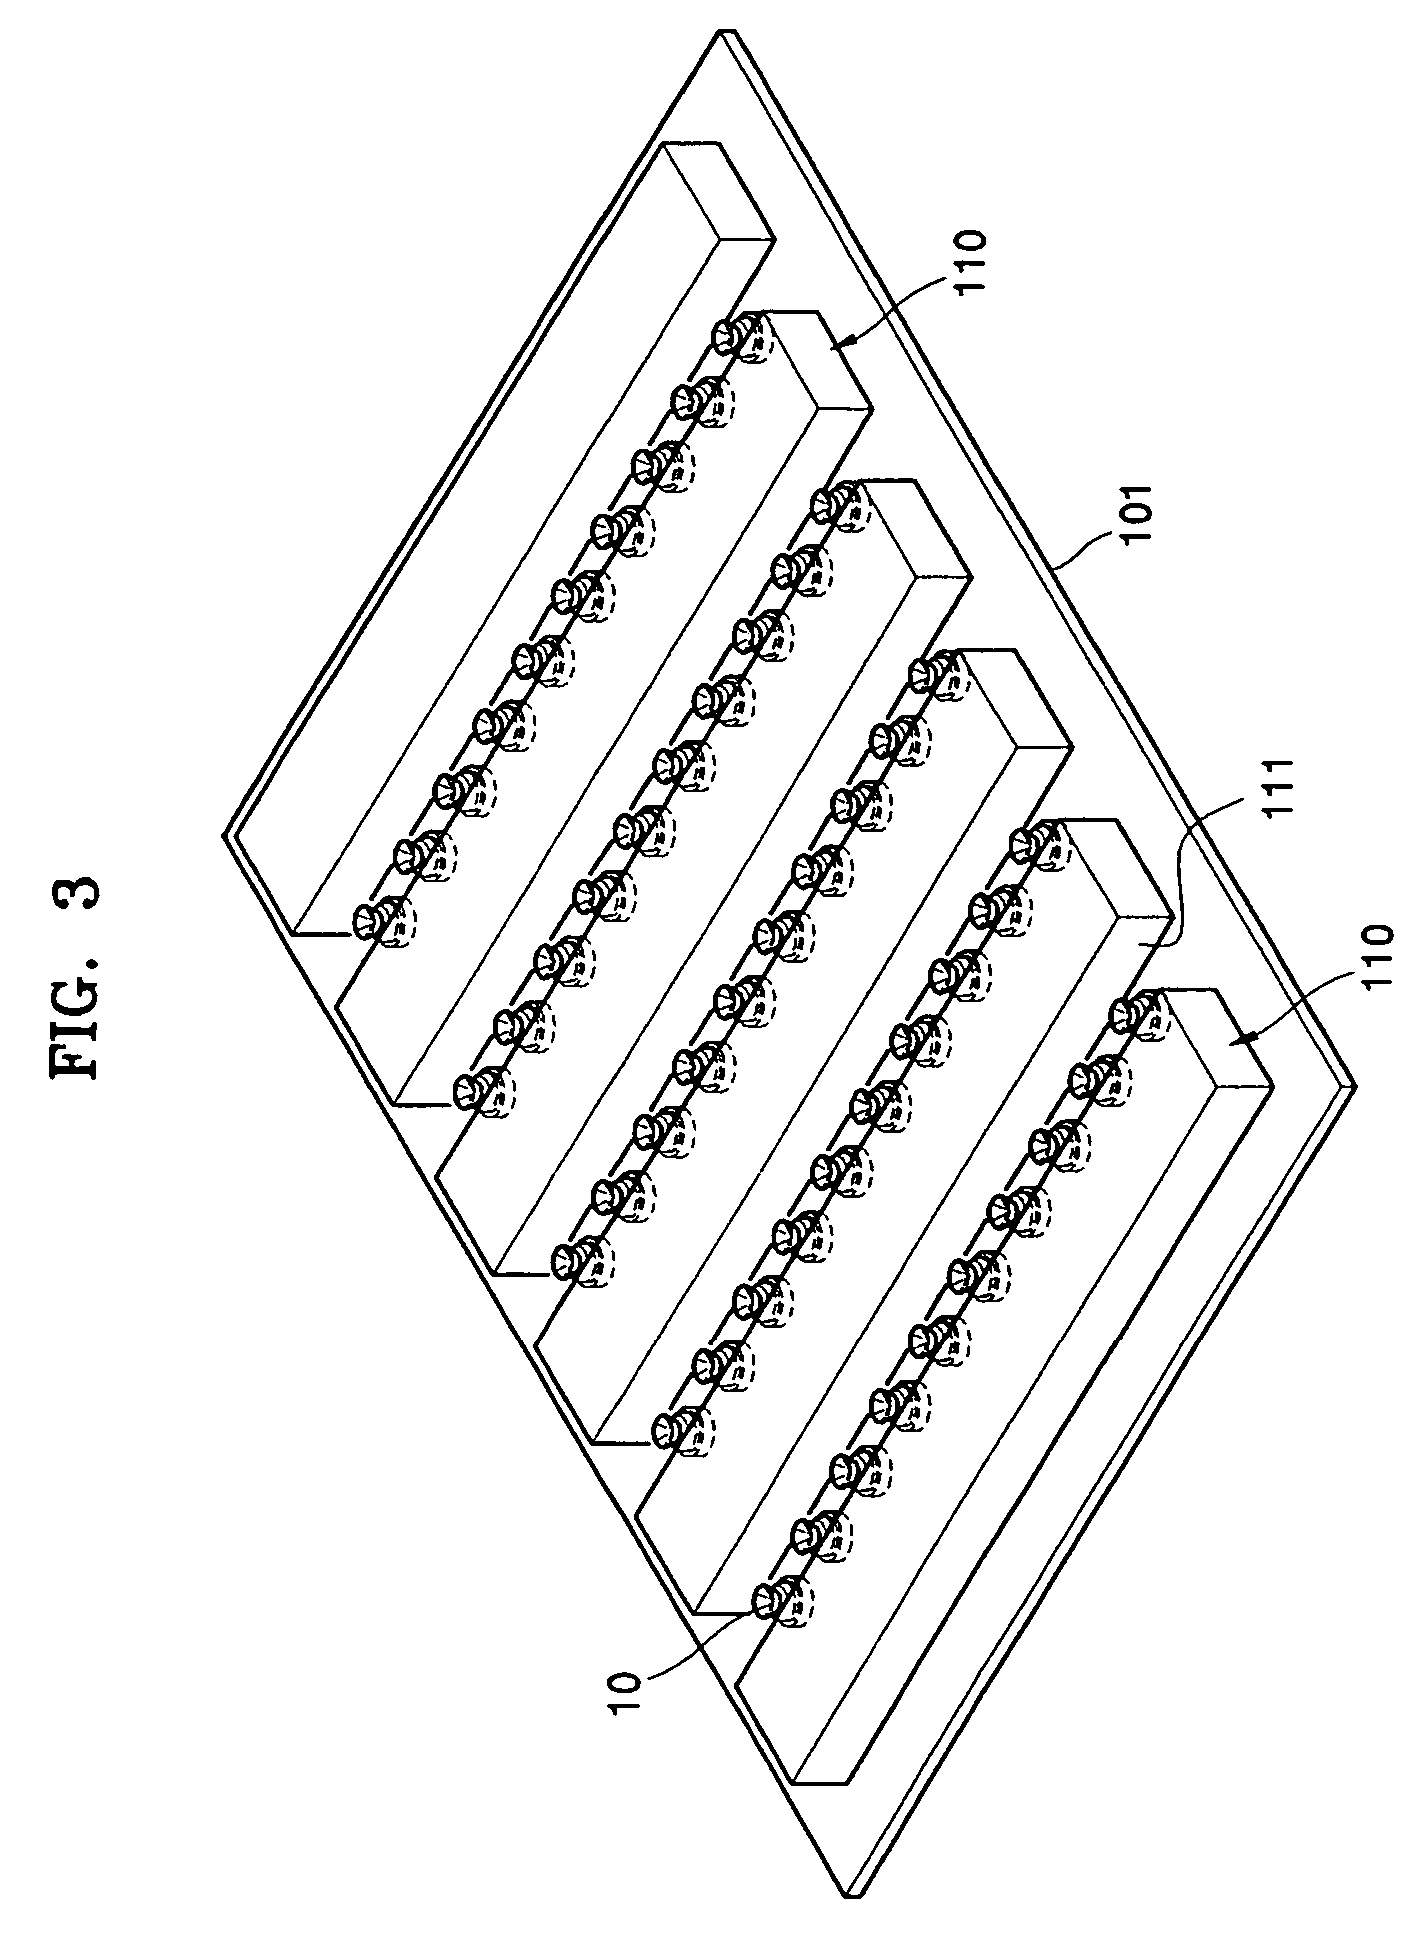 LCD backlight system using light emitting diode chip